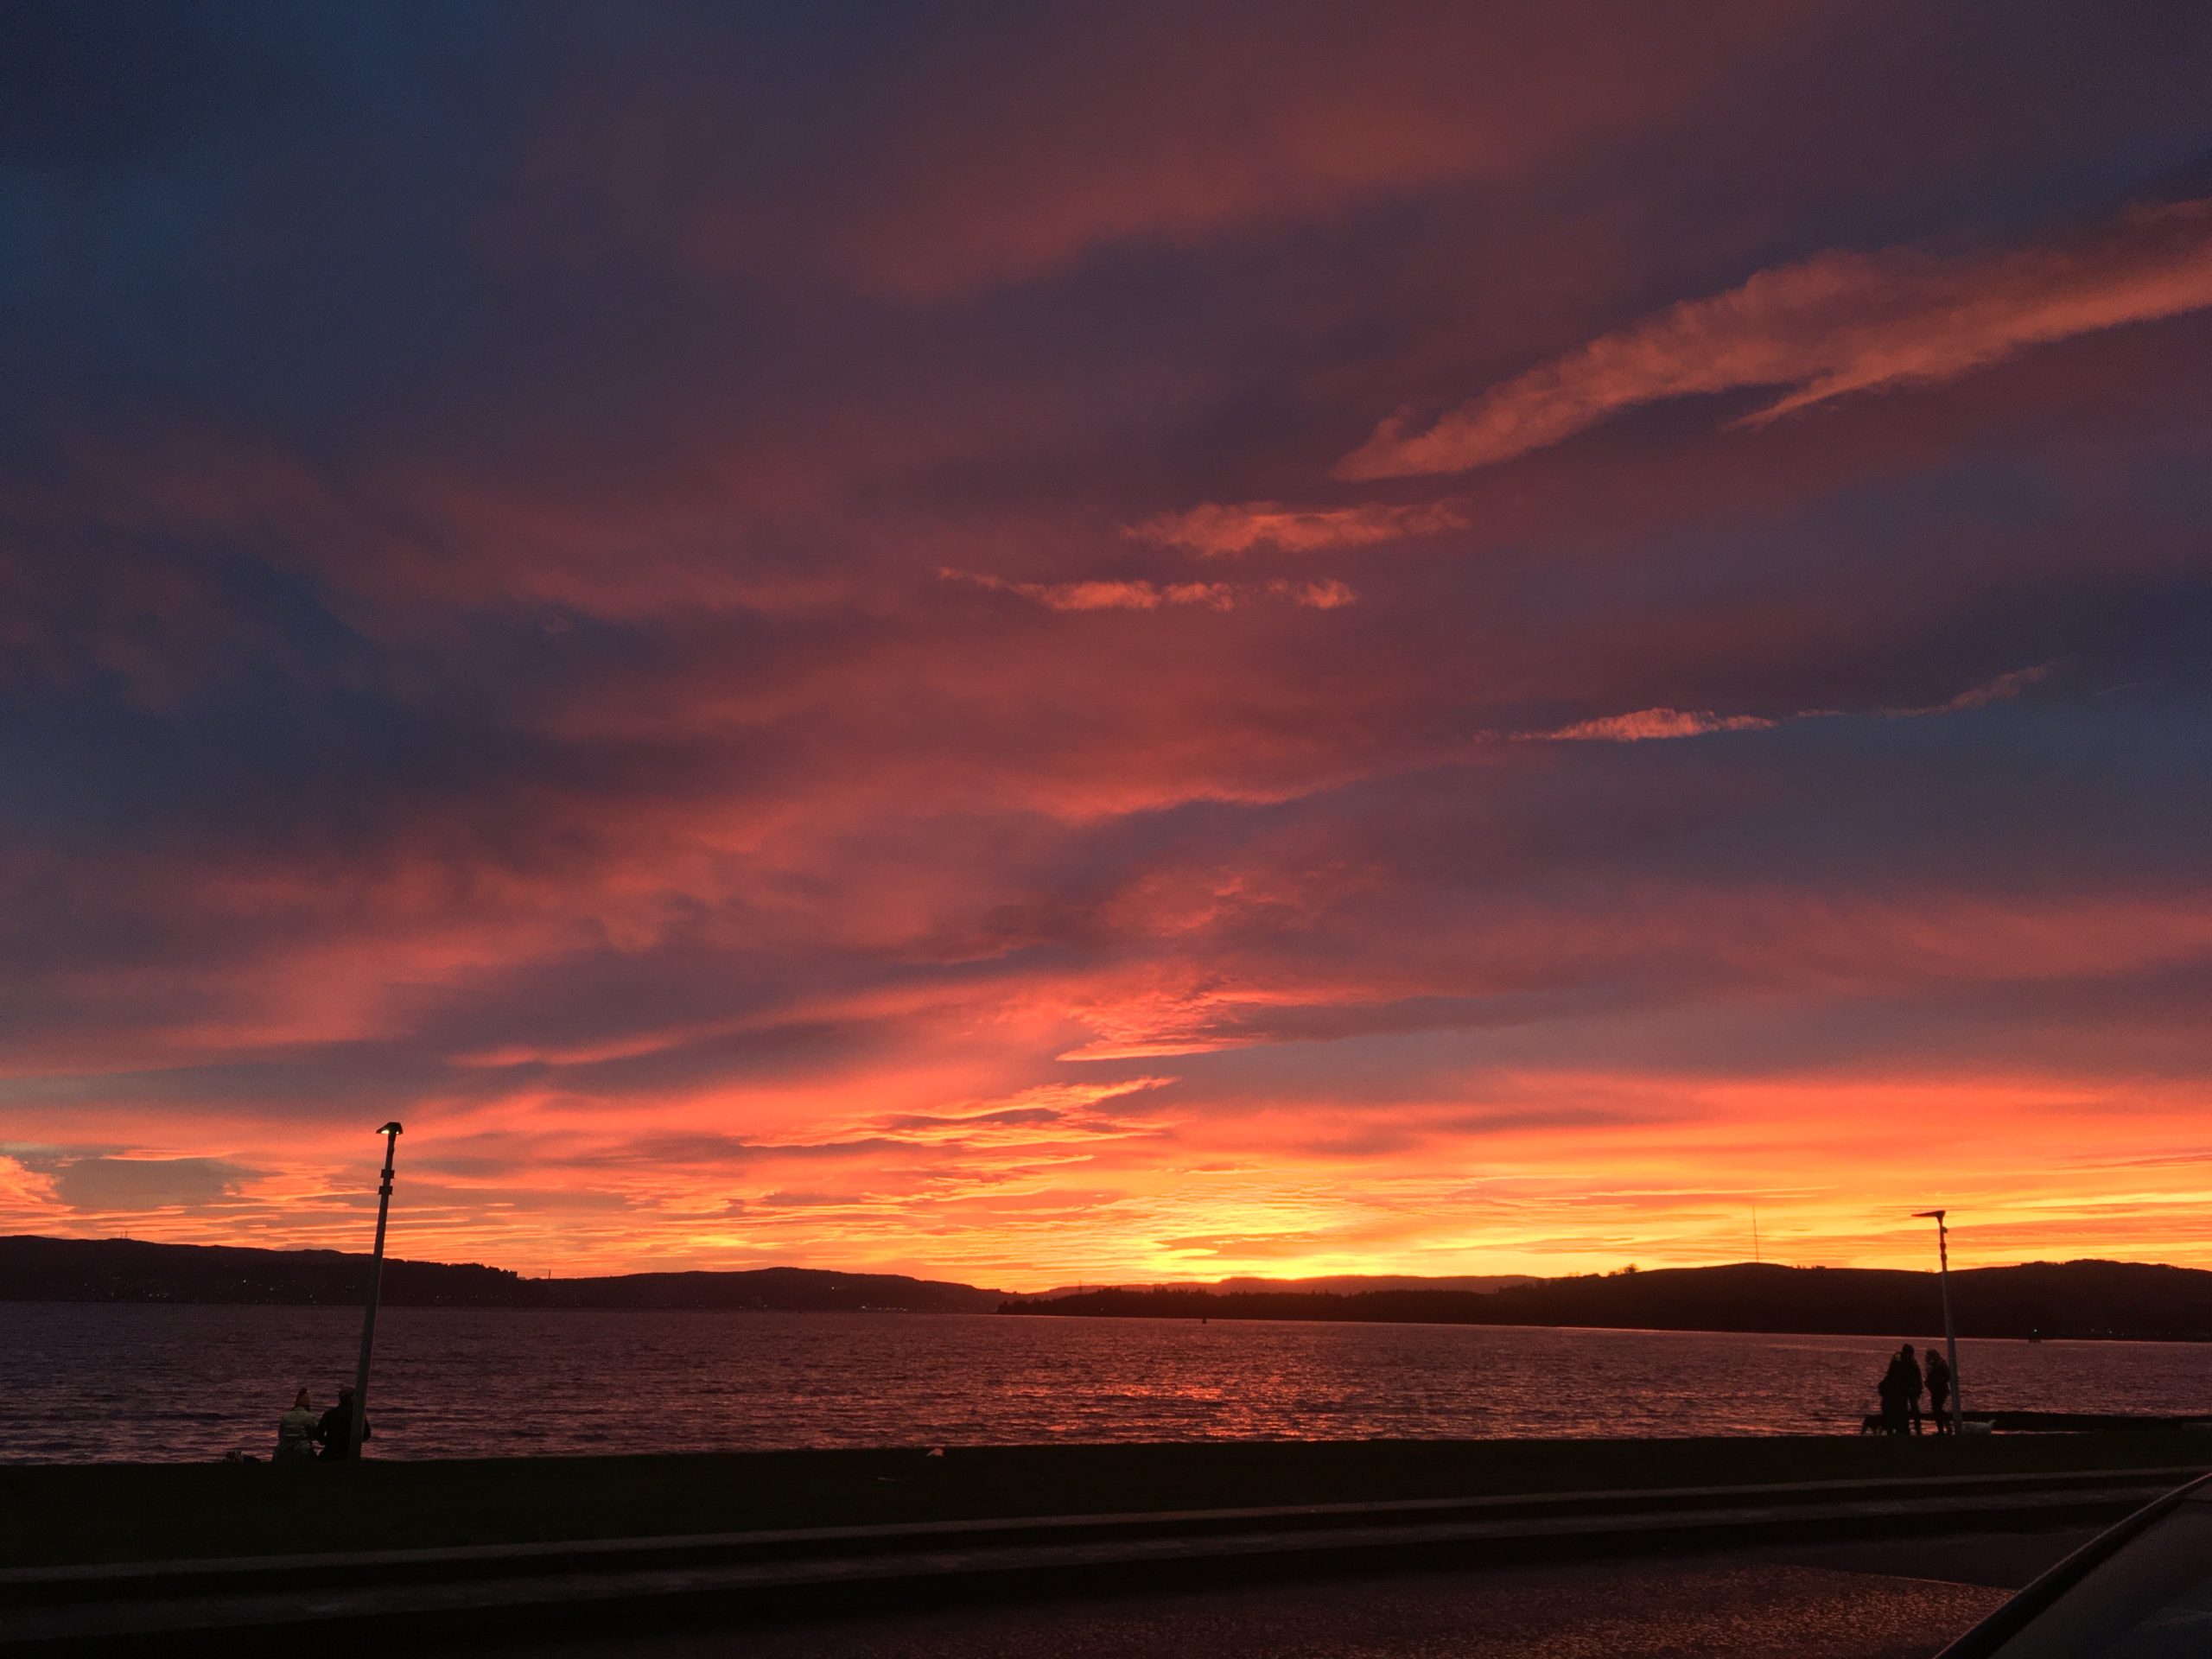 Sunset in Helensburgh by Andrew Turnbull.